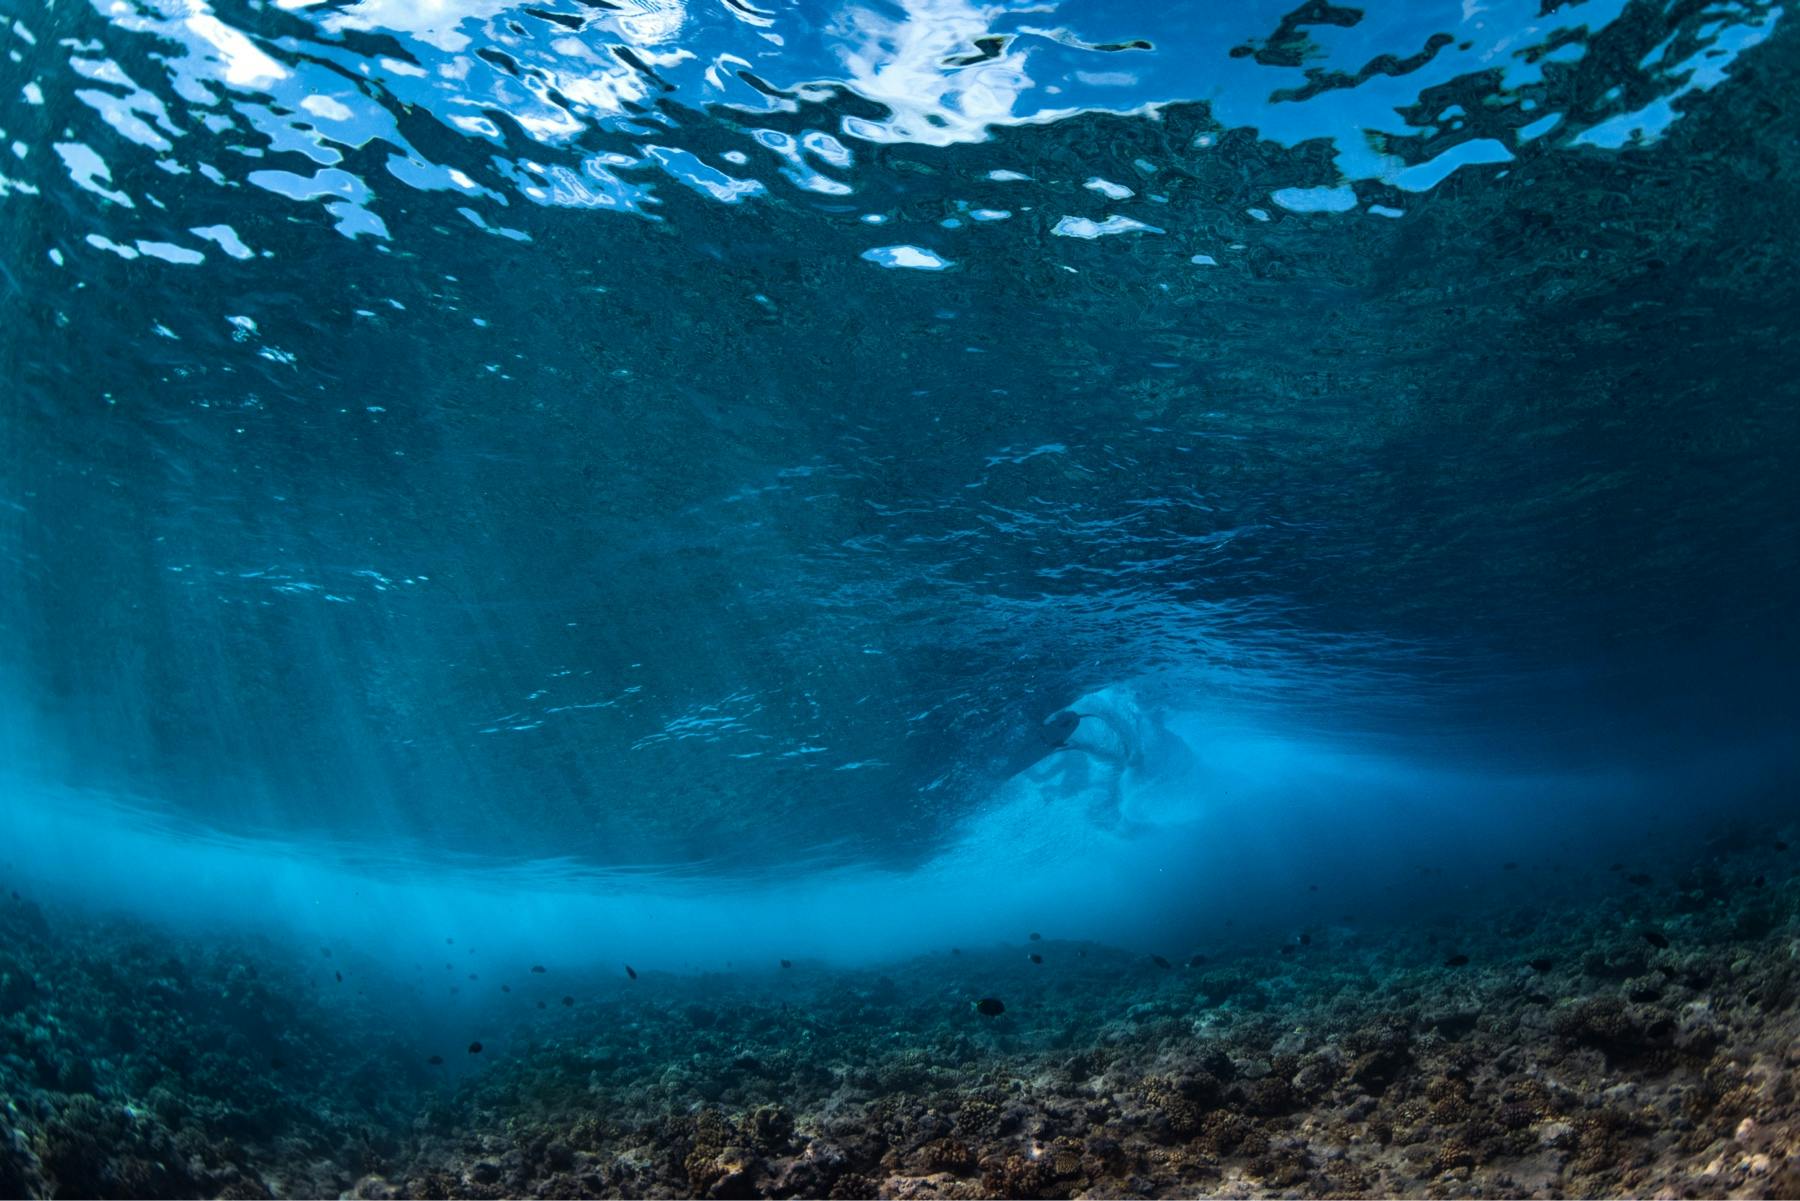 Underwater shot showing fish and the fins of a surfer's board in the Tuamotos photo by Ryan Chachi Craig